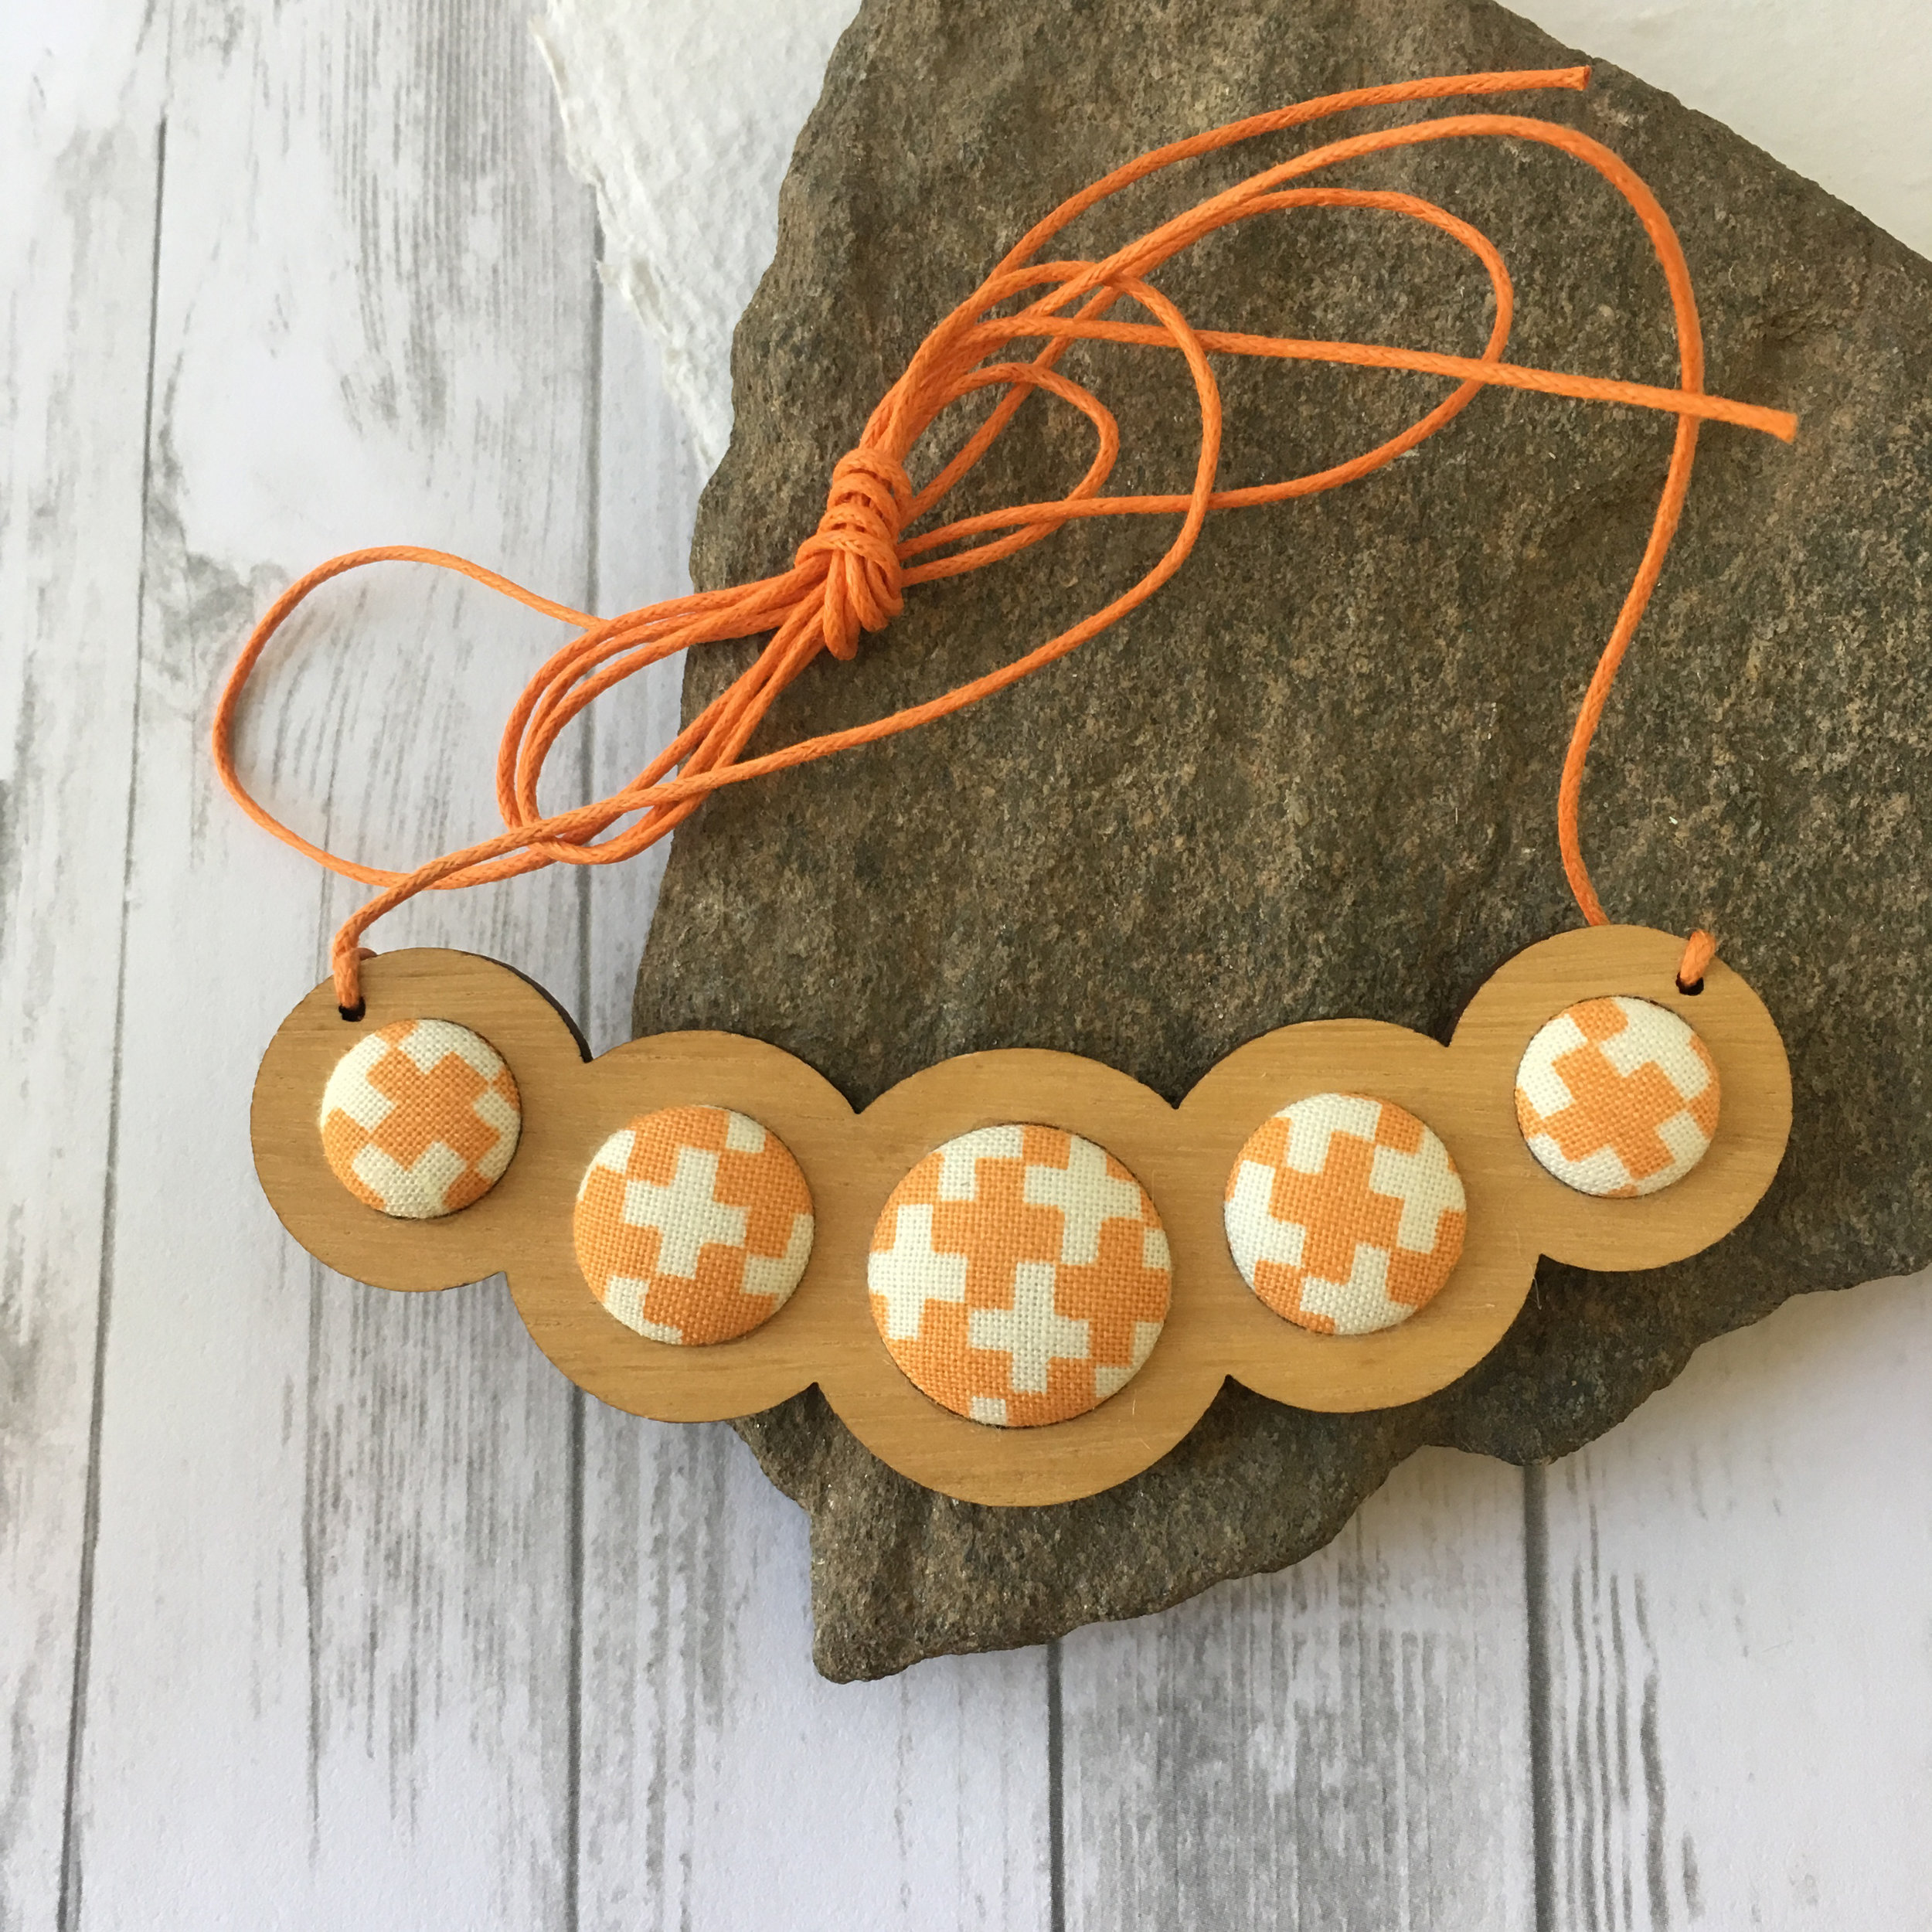 What can be made of buttons: Handmade necklace with adjustable buckle – DIY  is FUN